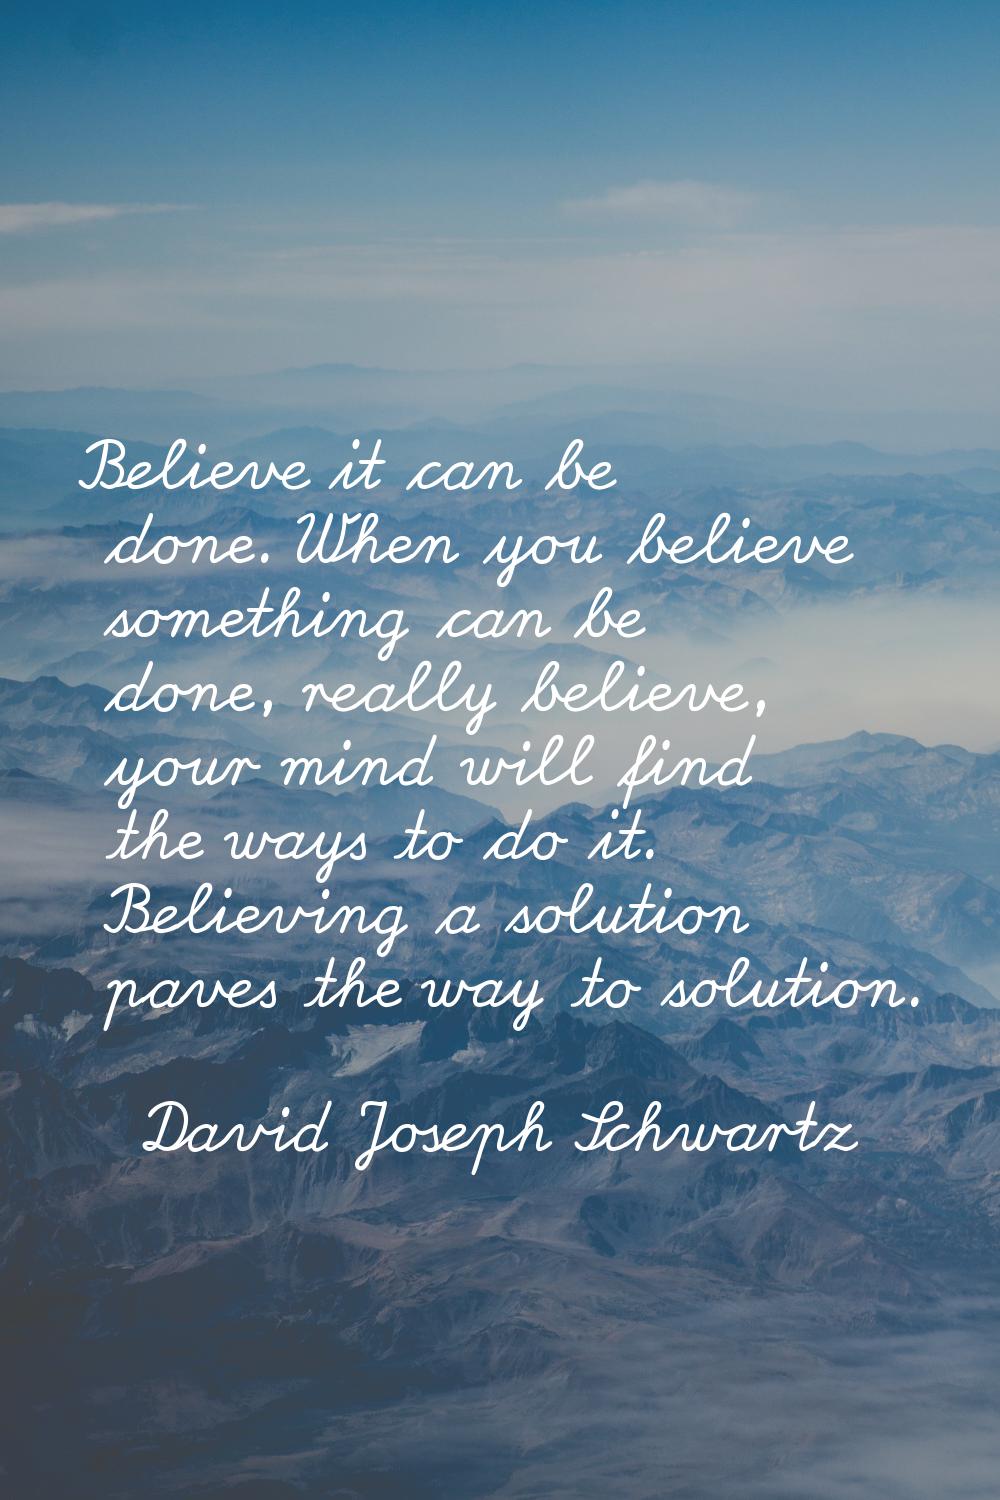 Believe it can be done. When you believe something can be done, really believe, your mind will find